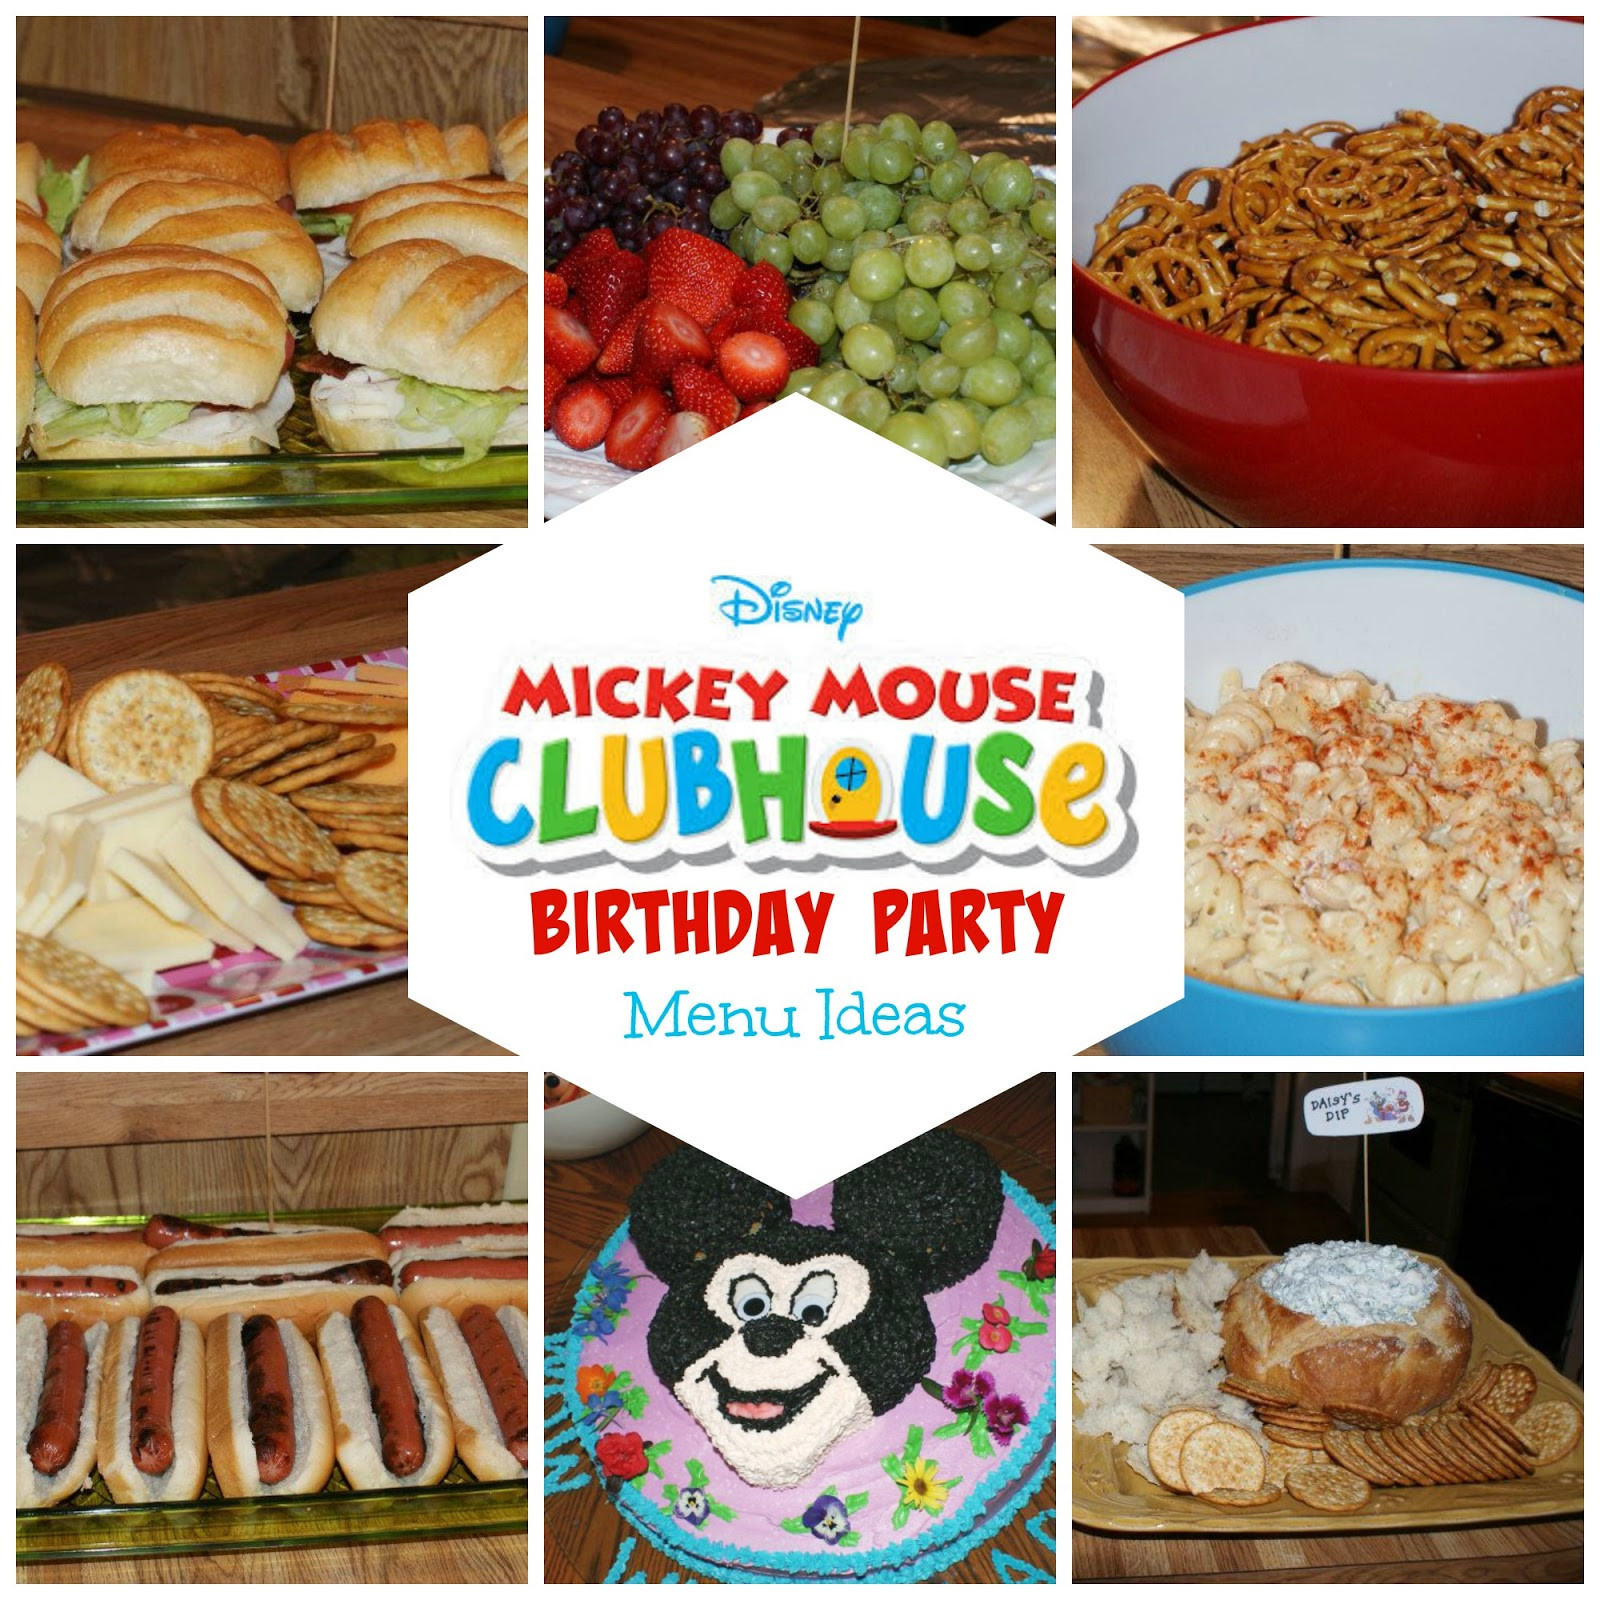 Mickey Mouse Clubhouse Birthday Party Ideas Food
 8 Mickey Mouse Birthday Party Menu Ideas